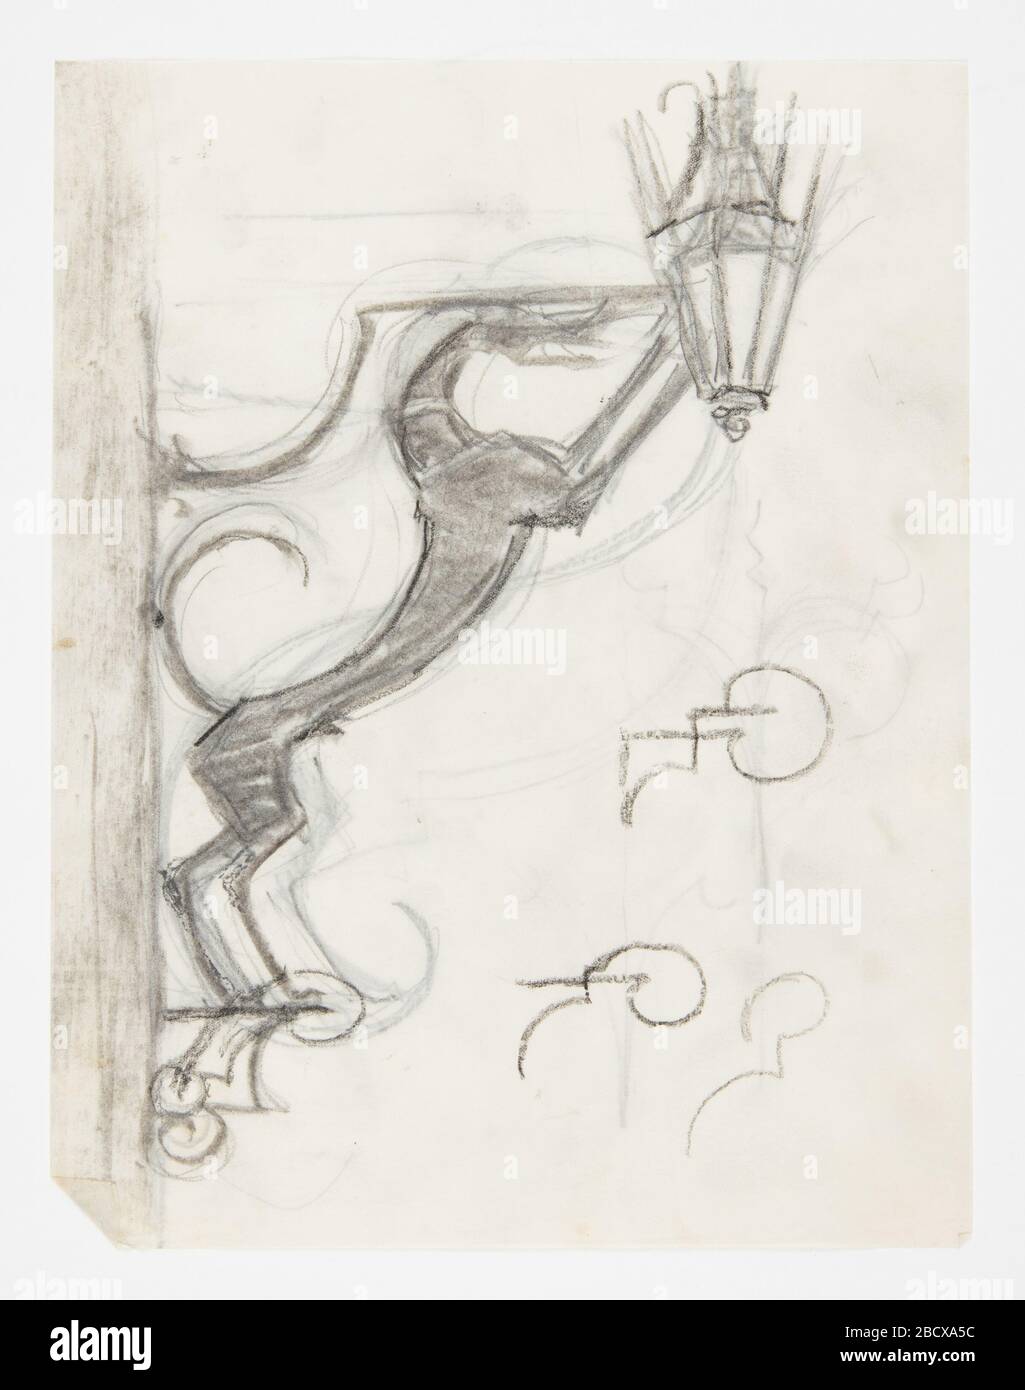 Design for Sconce Hound. Design for a wall-mounted sconce intended to be executed in metal. Figure of a hound with curling tail forms the armature, the glass lantern at the tips of its outstretched arms. At lower right, sketchy ornamental details. Design for Sconce Hound Stock Photo